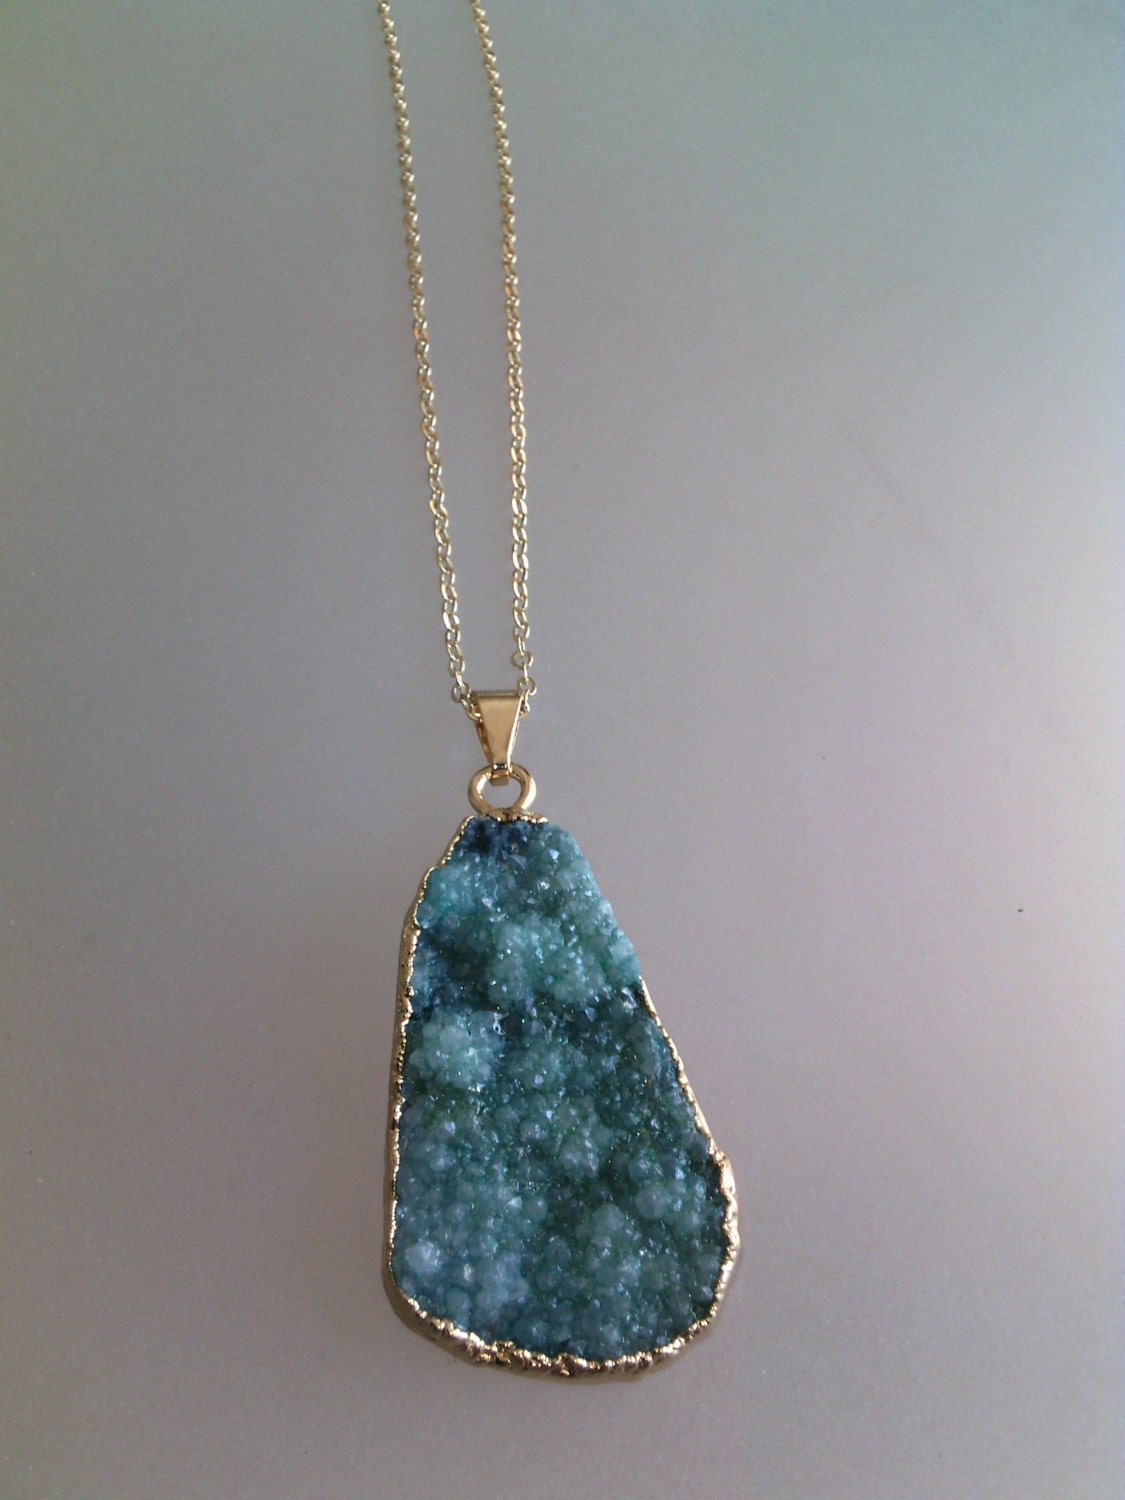 Natural GREEN Amethyst Agate Crystal DRUZY Pendant / Gemstone Necklace ...